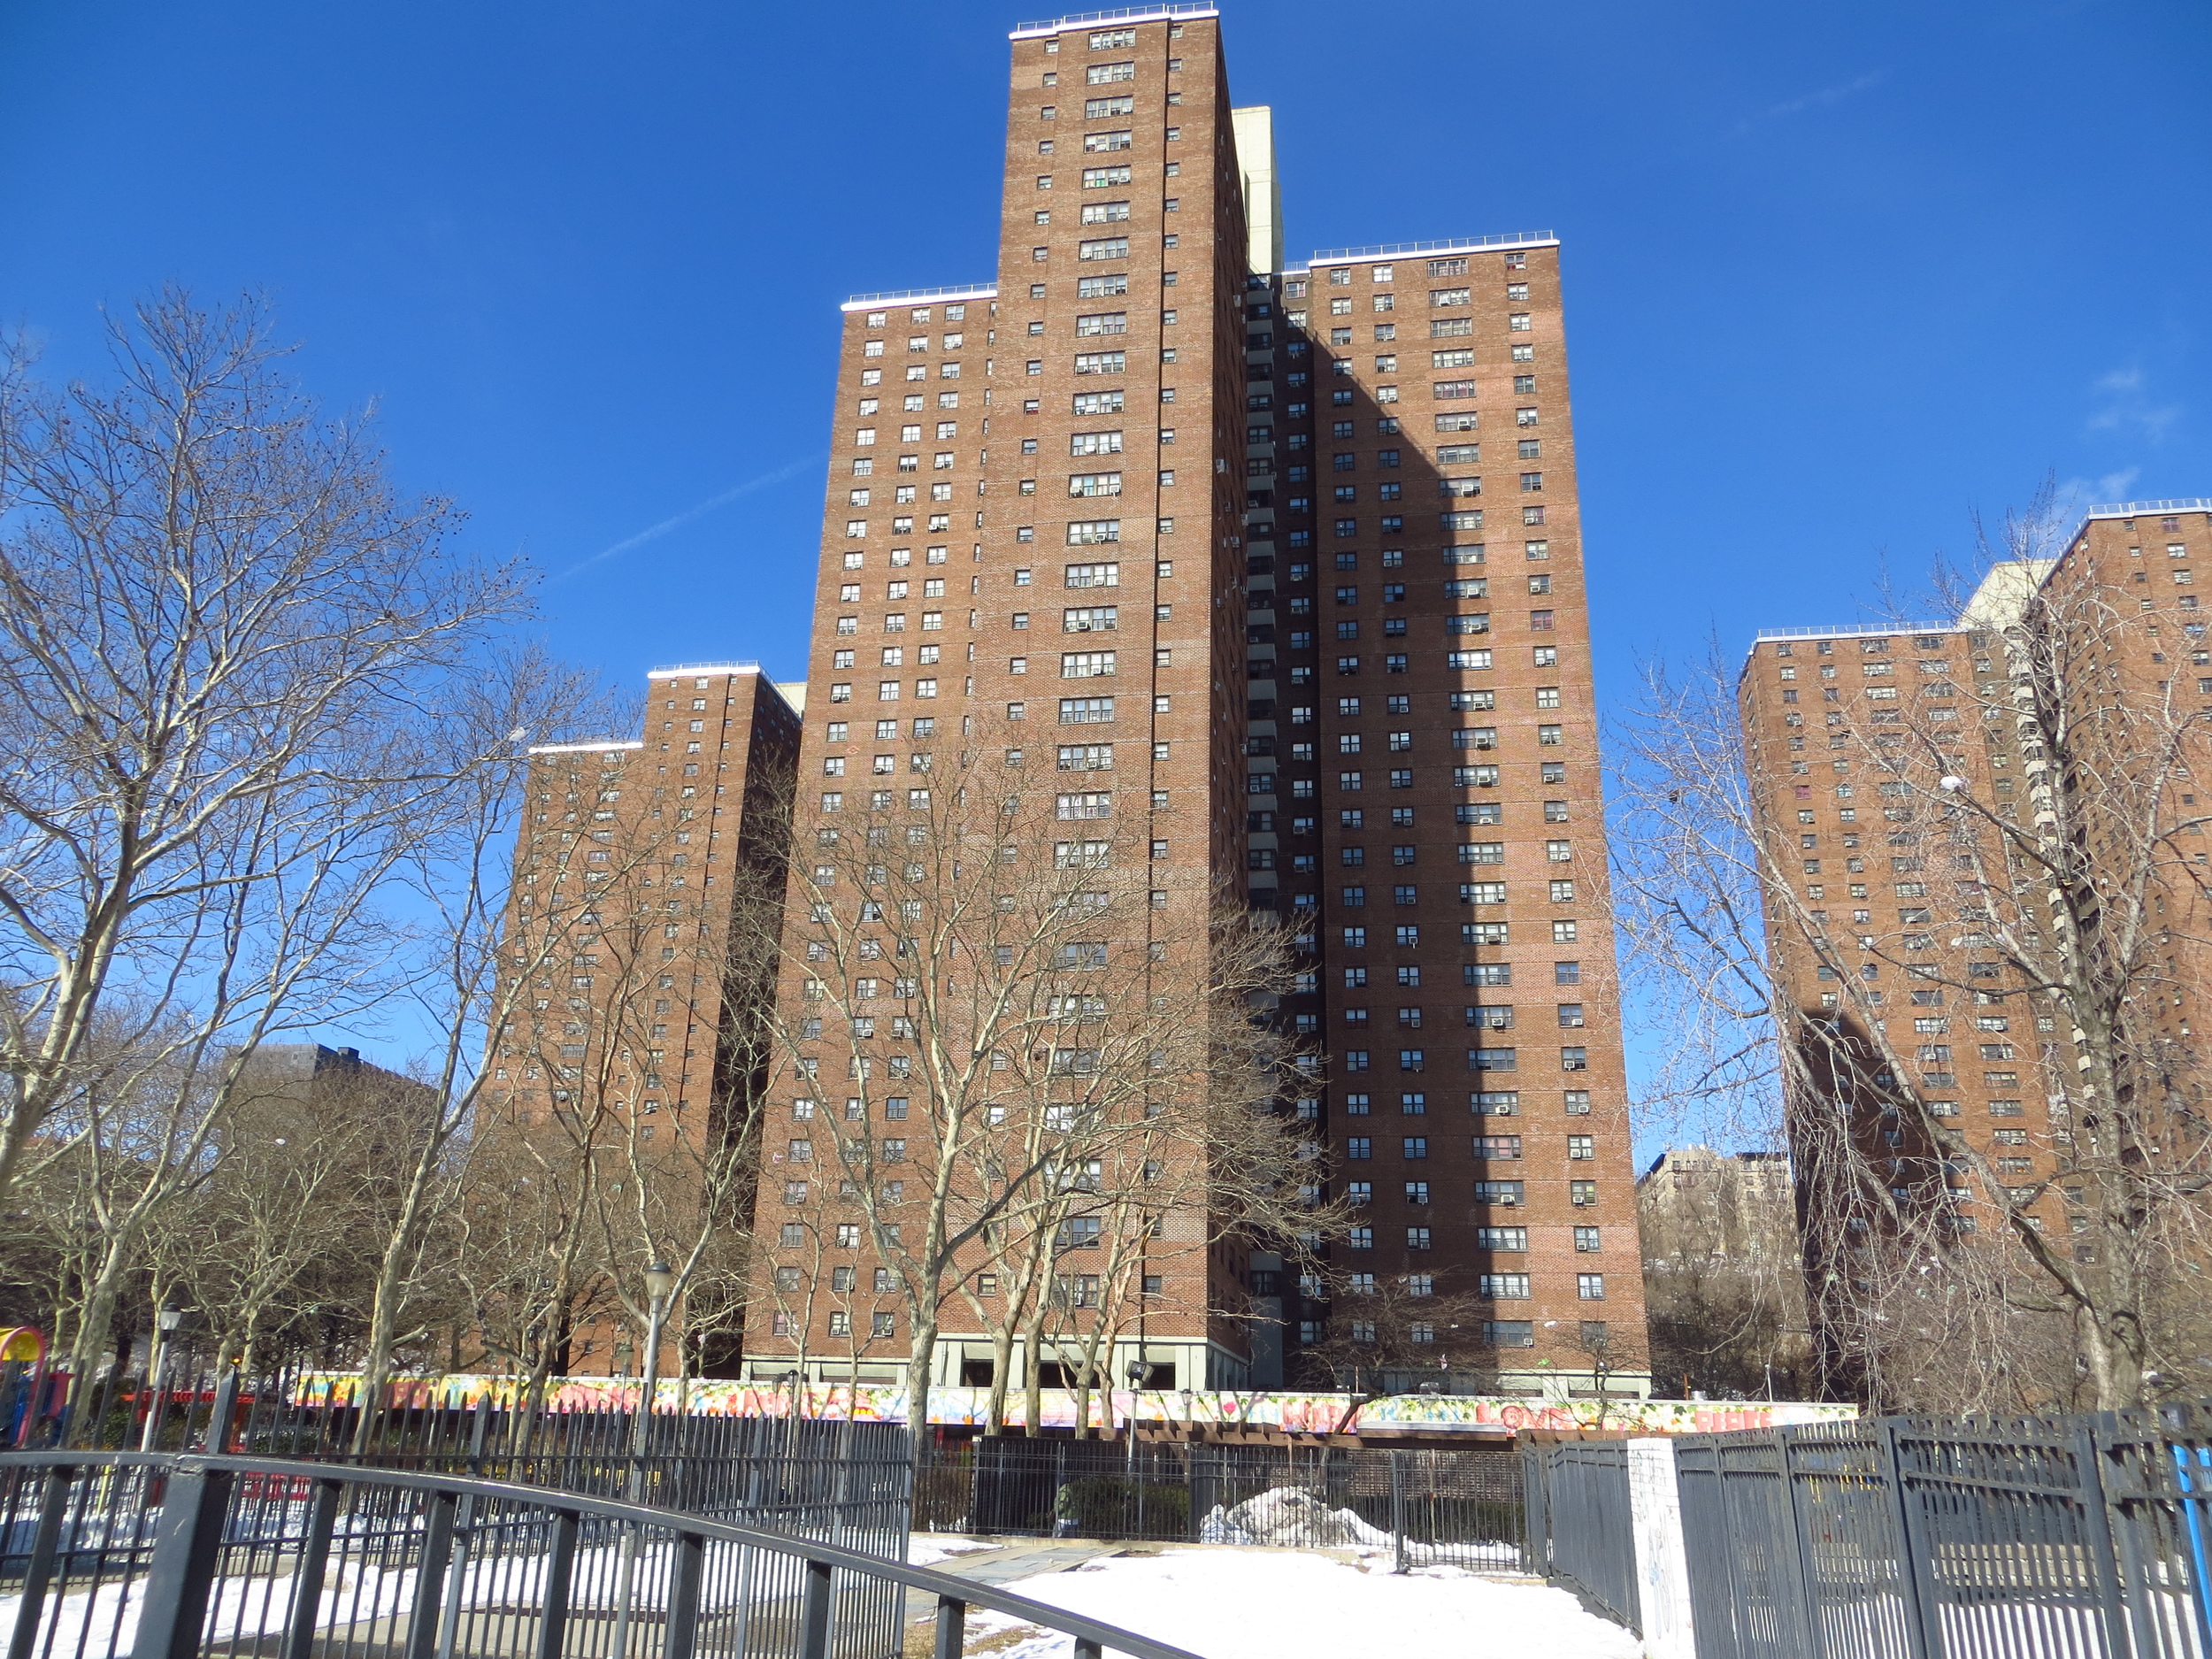 Polo Grounds Towers public housing projects